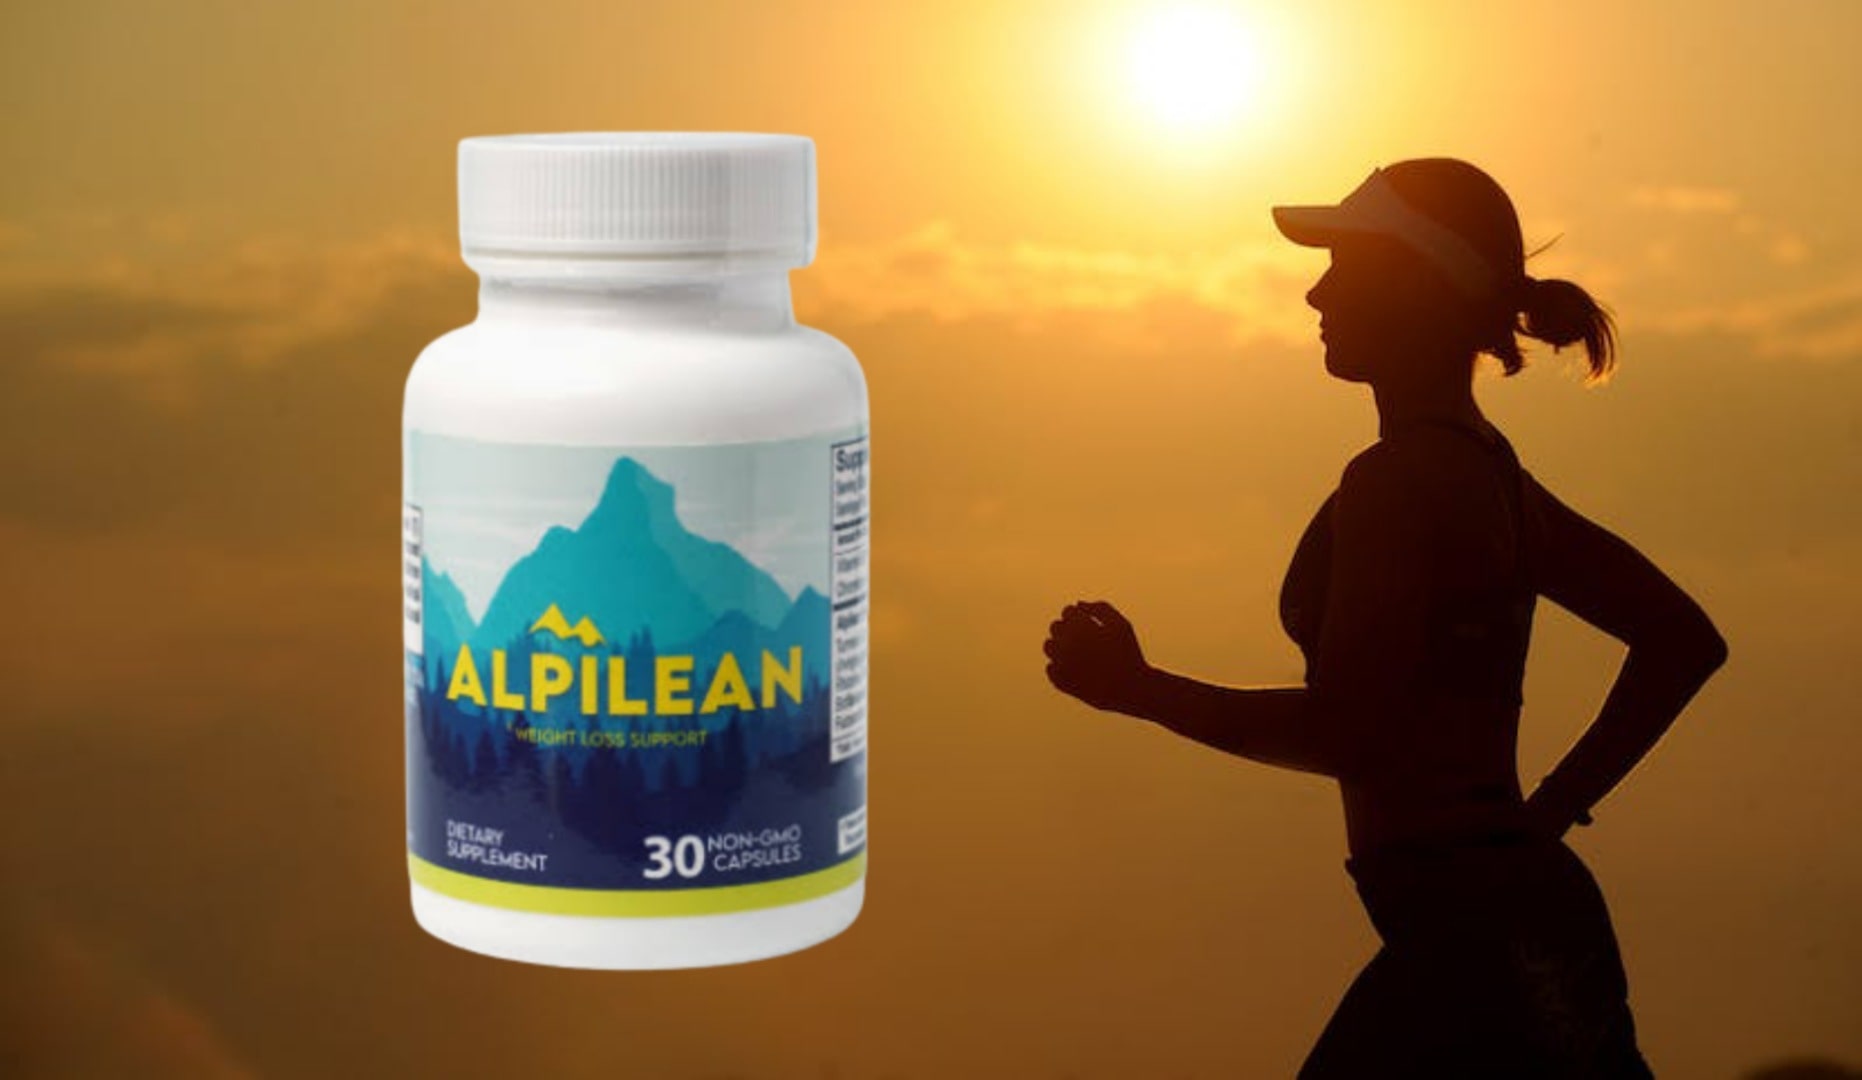 Alpilean Reviews: Ice Hack Weight Loss Pills – Are They Worth the Investment or Should You Steer Clear?